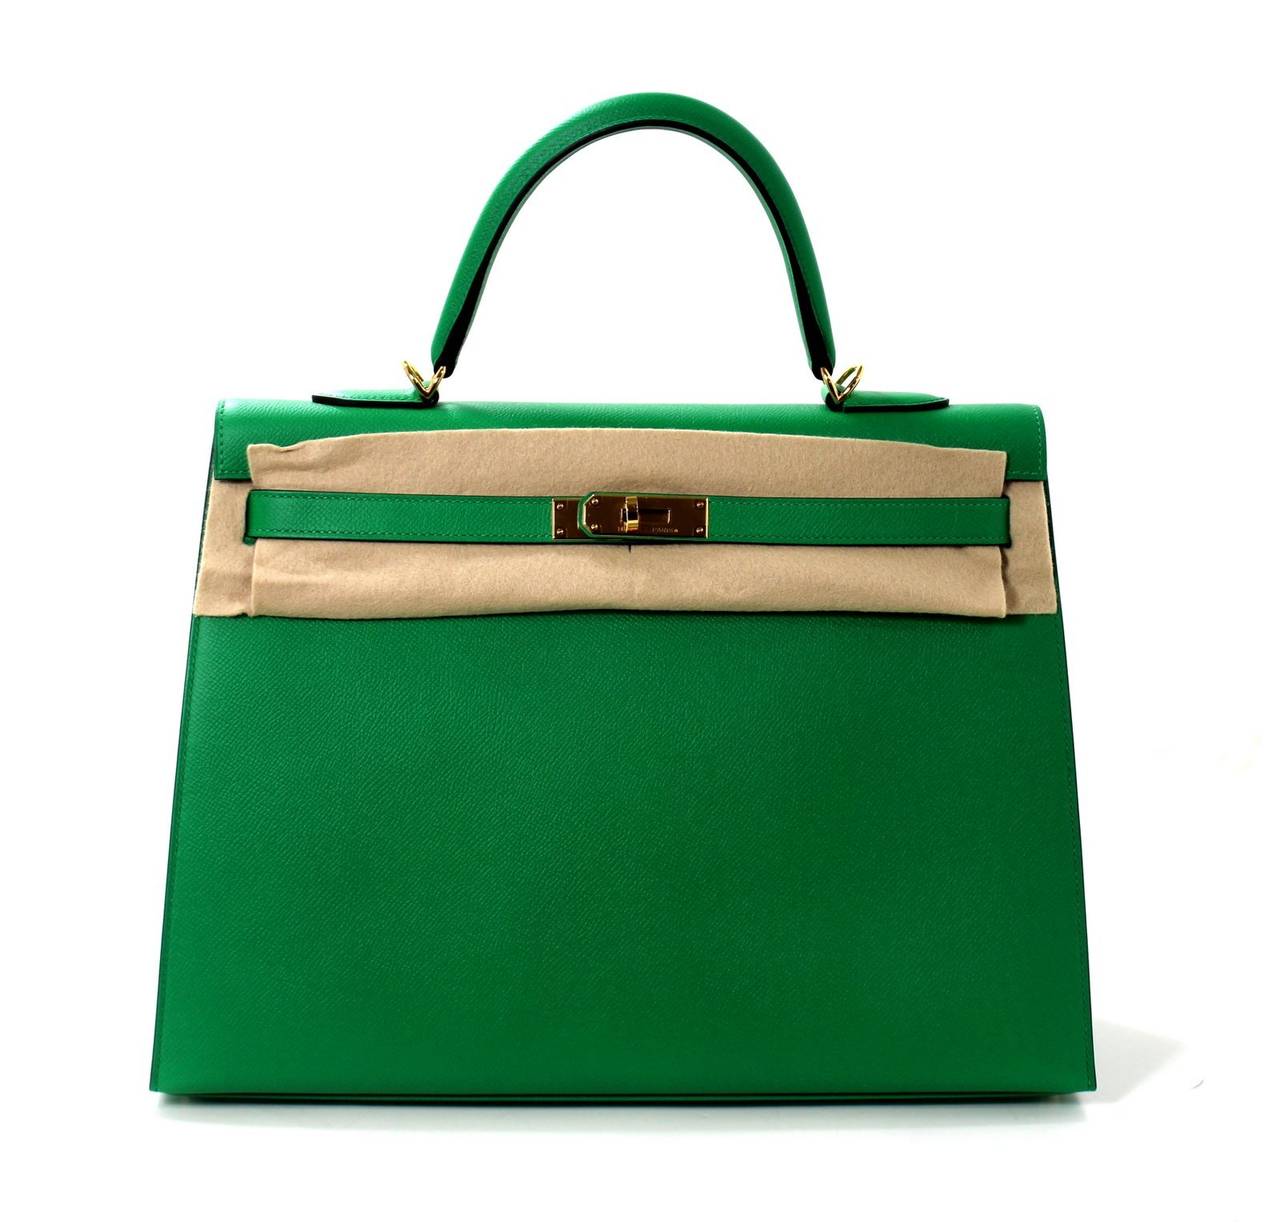 Hermes Bamboo Green 35 cm Kelly Bag- Epsom Leather with Gold 4